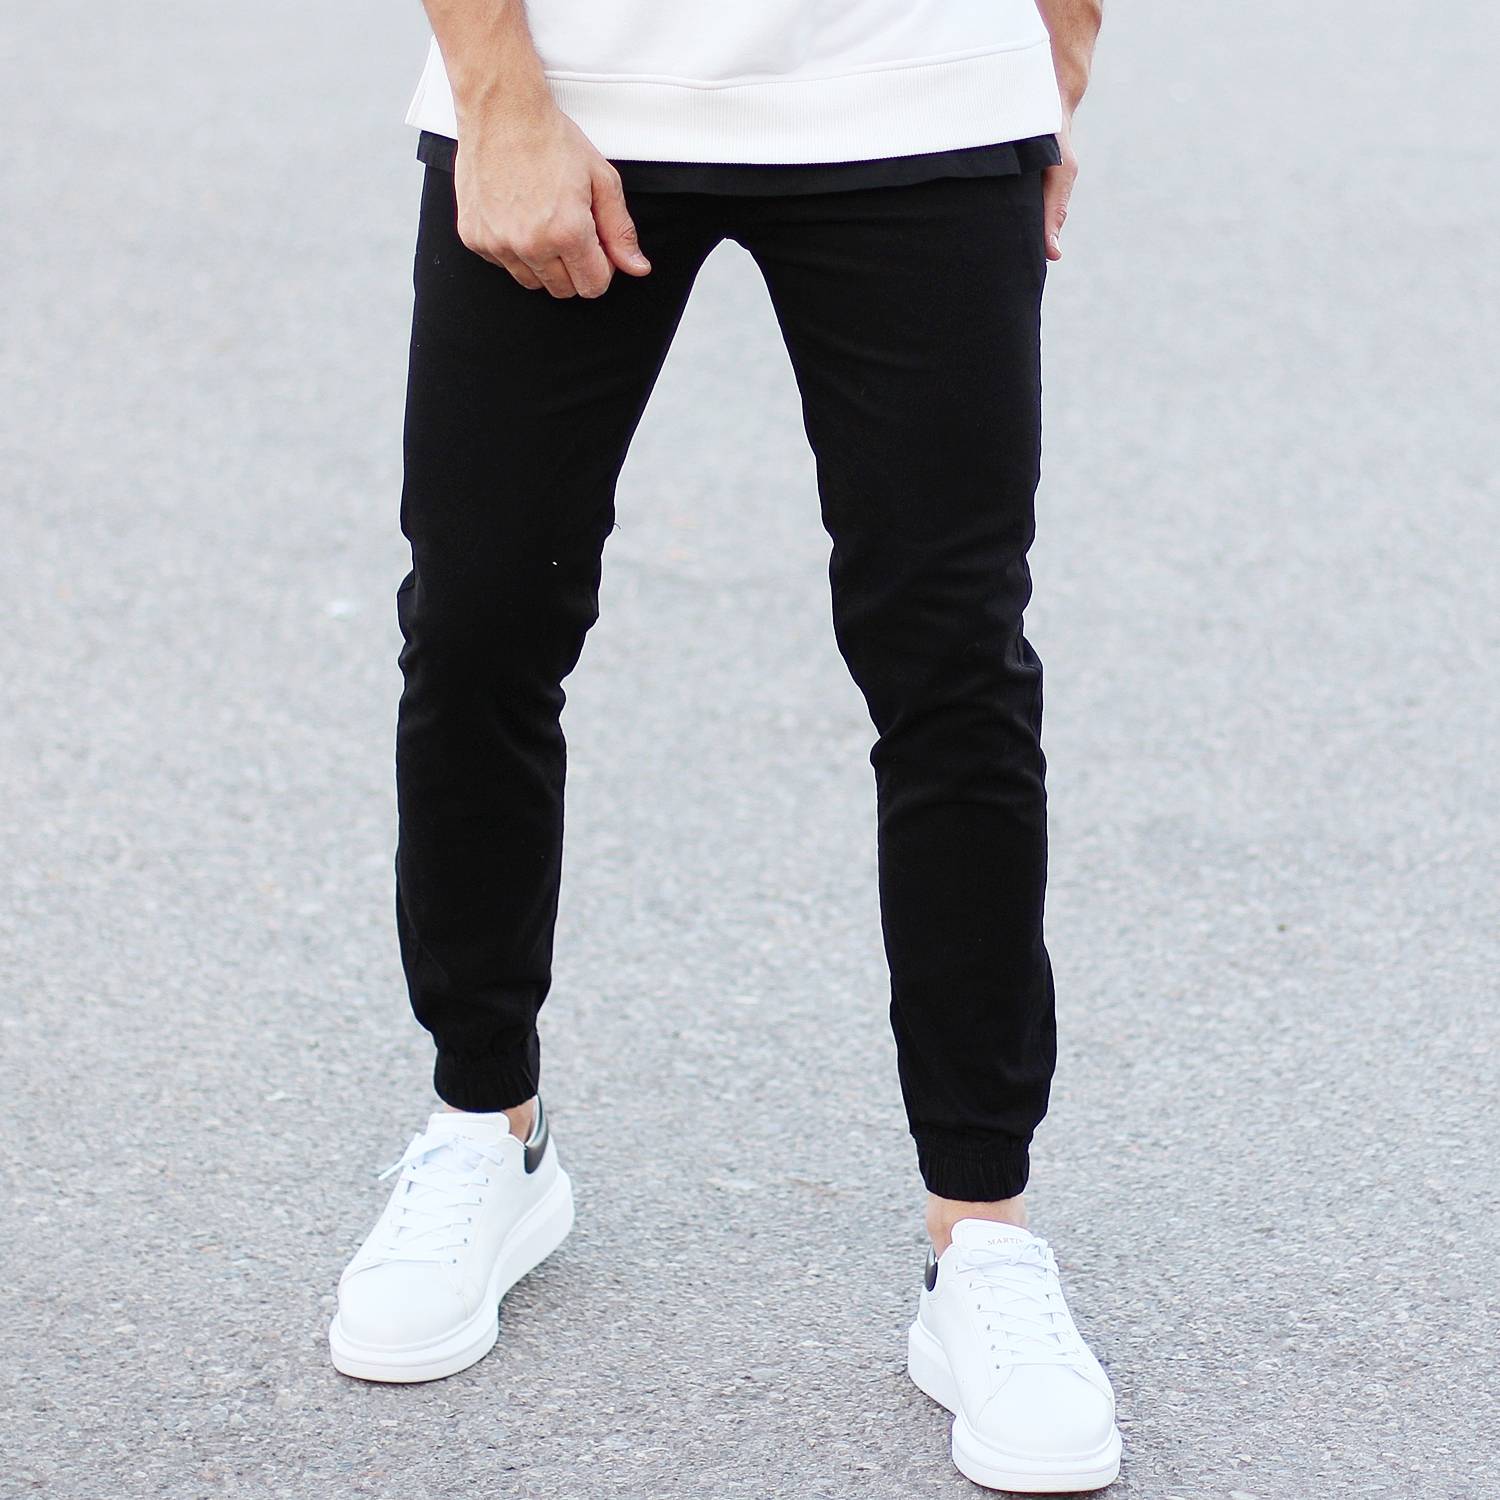 men's gray casual pants Cheaper Than Retail Price> Buy Clothing ...